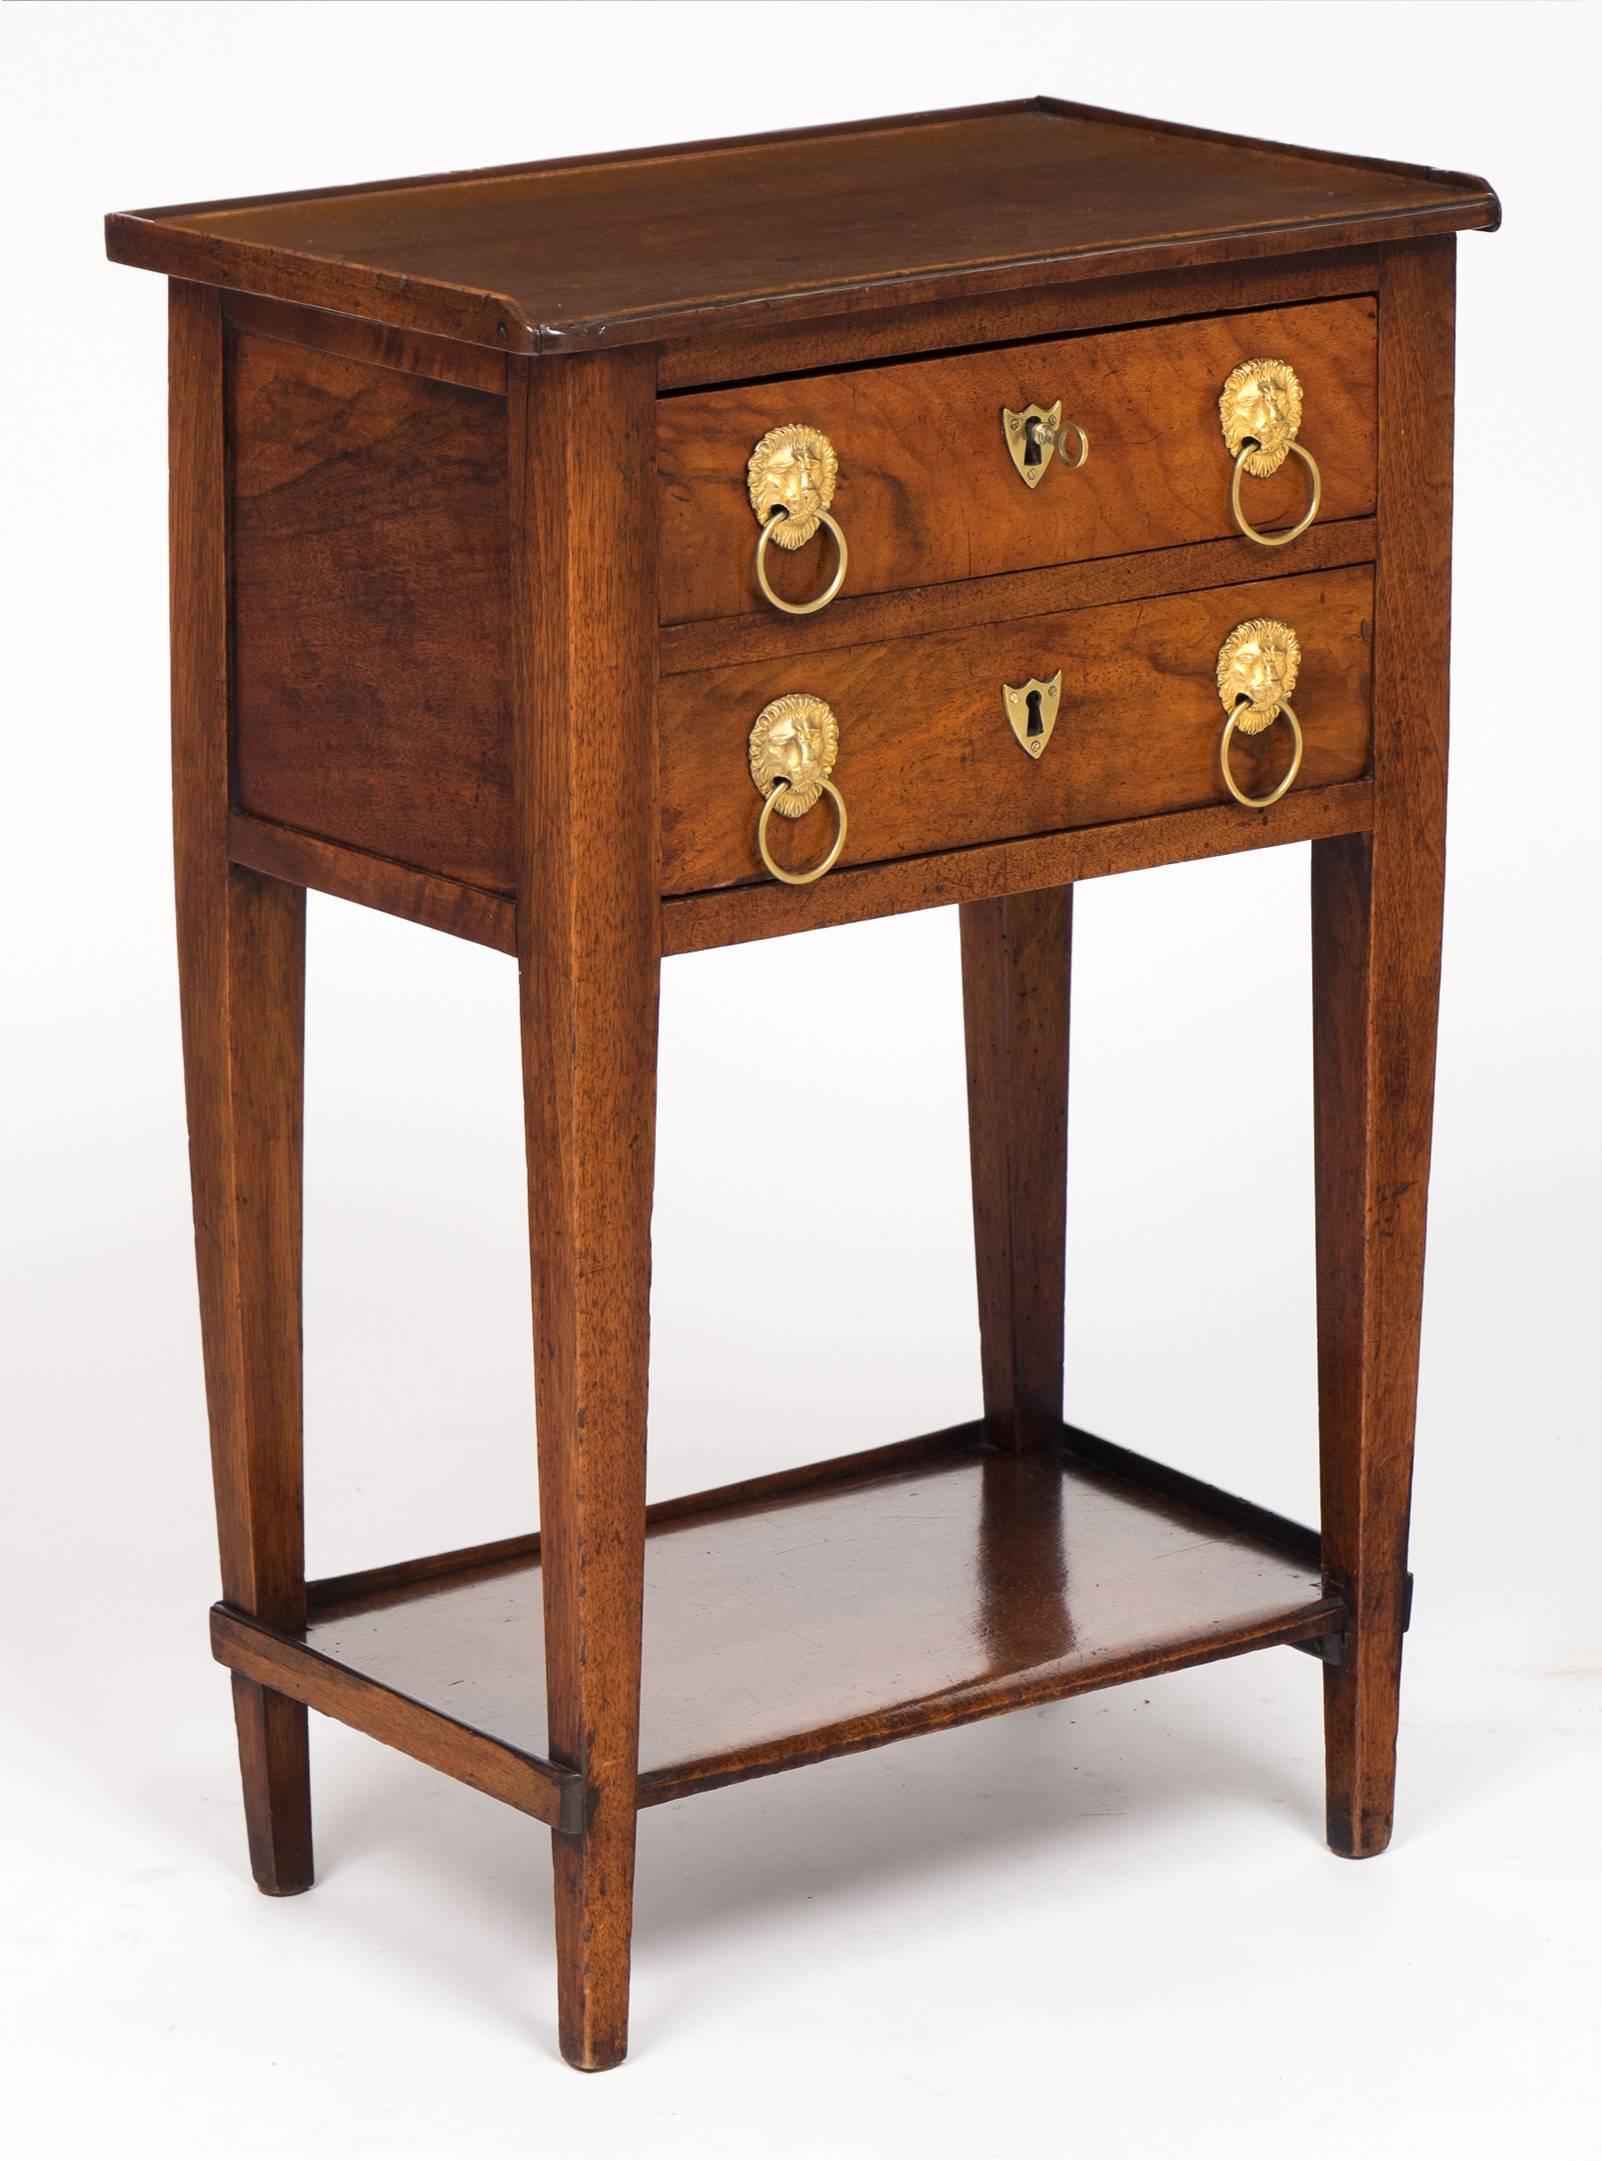 French Consulat period side table in solid burl walnut and solid elm, with original ormolu lion head hardware, finely cast, on two dovetailed drawers; tapered legs; and bottom shelf.